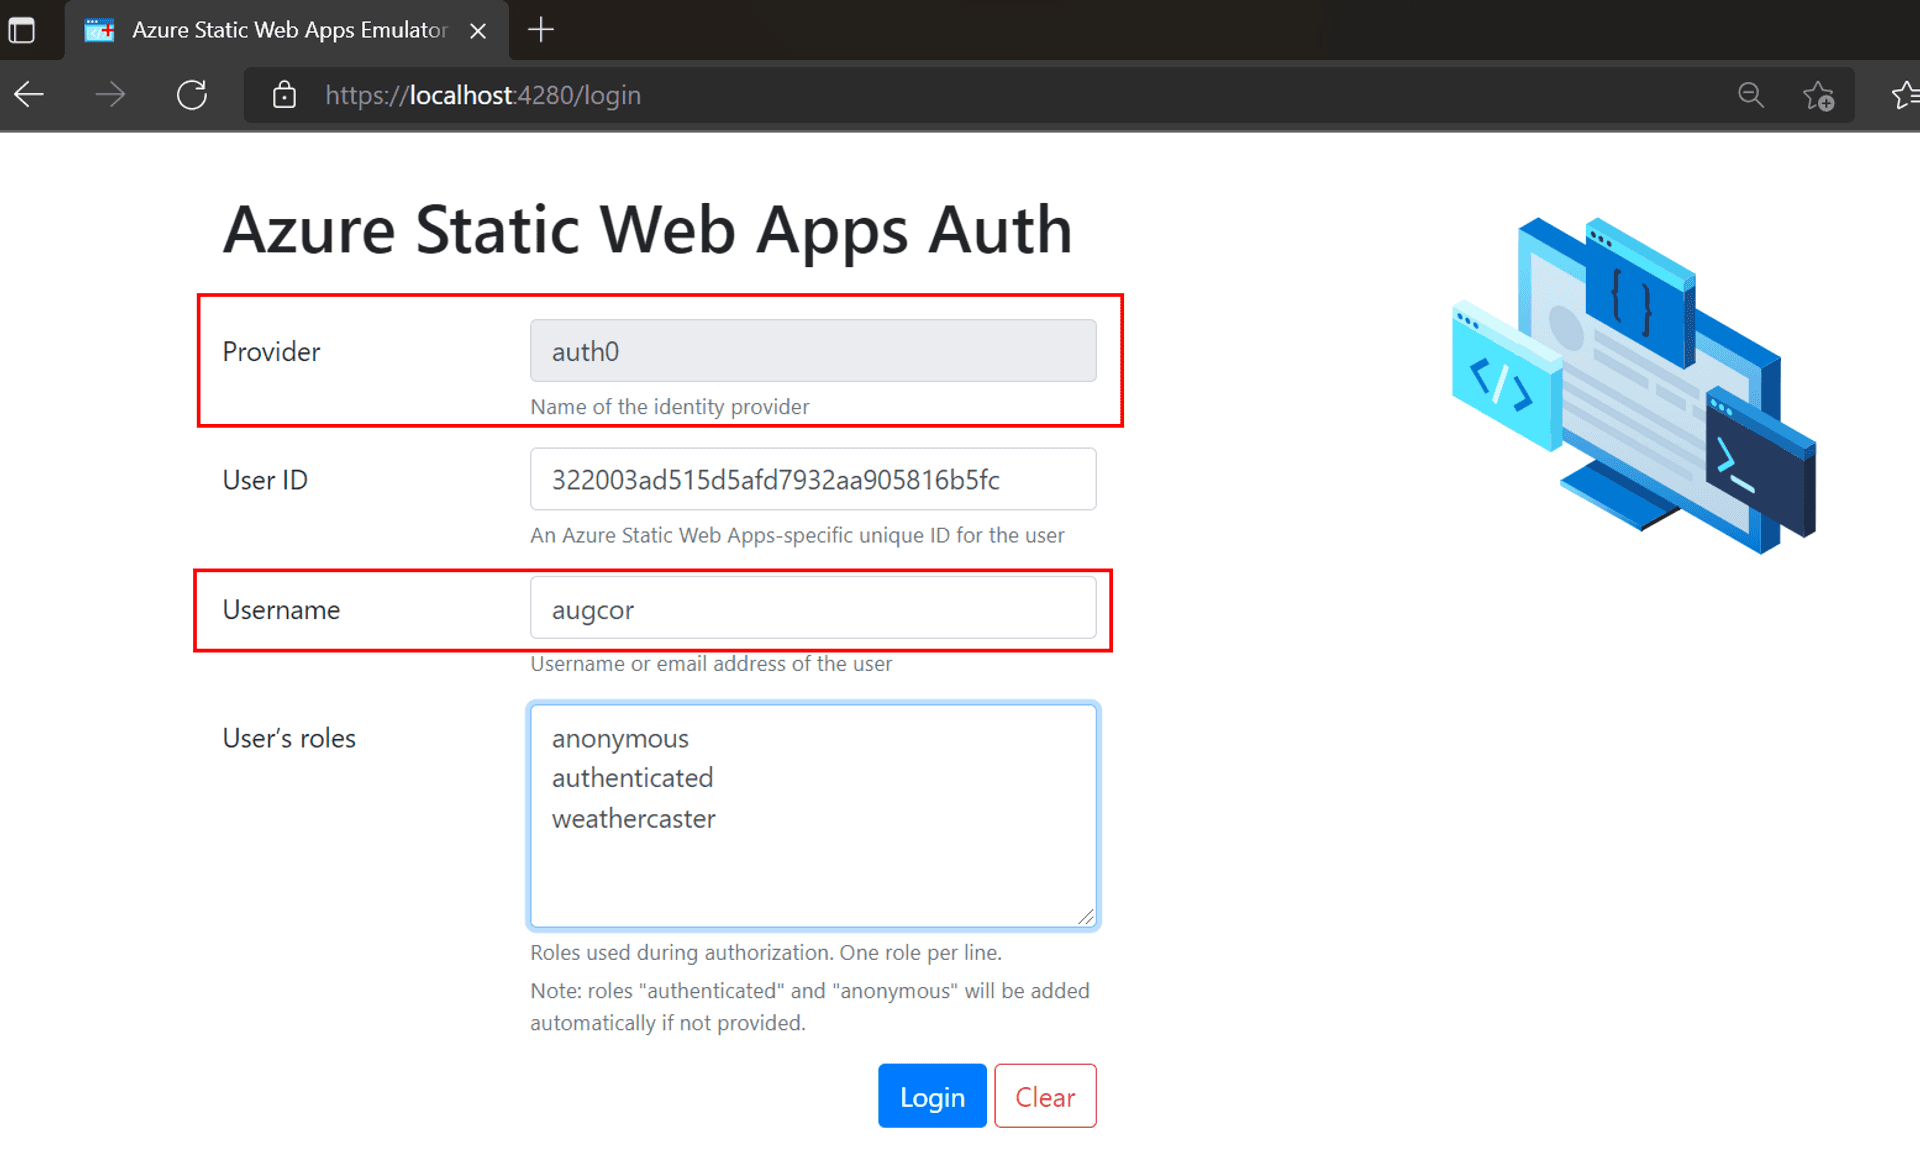 Azure SWA emulator with the provider and username inputs highlighted in red